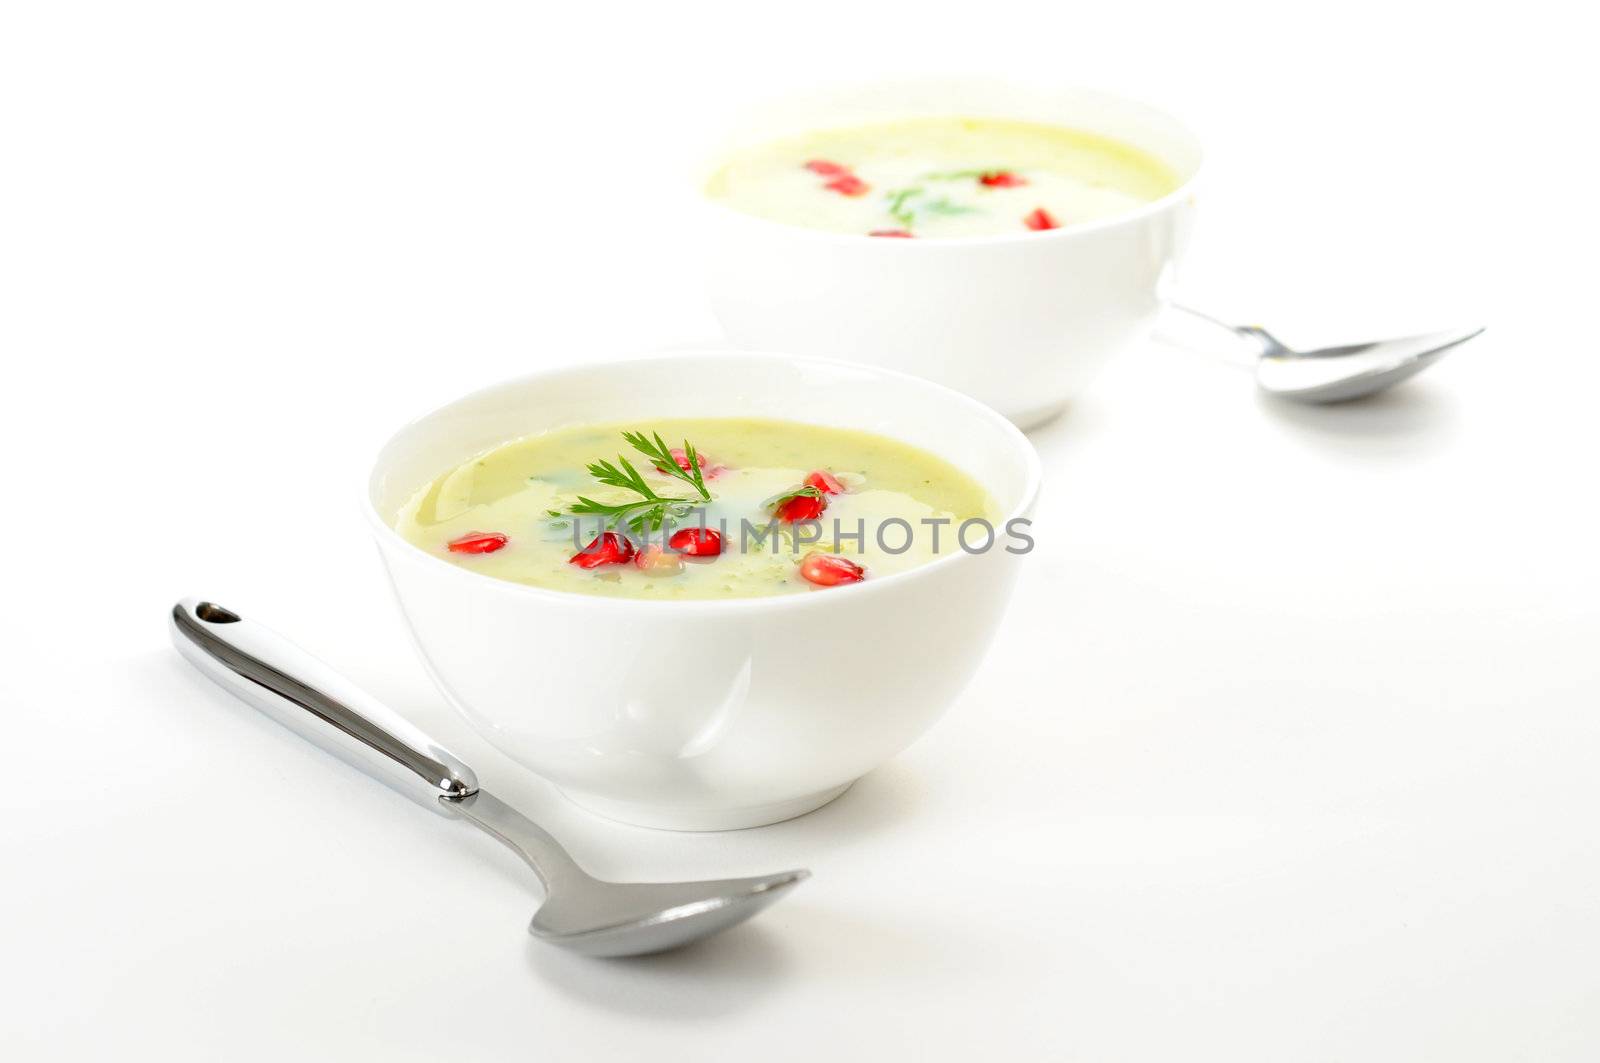 Bowls of health broccoli soup garnished with pomegranate.